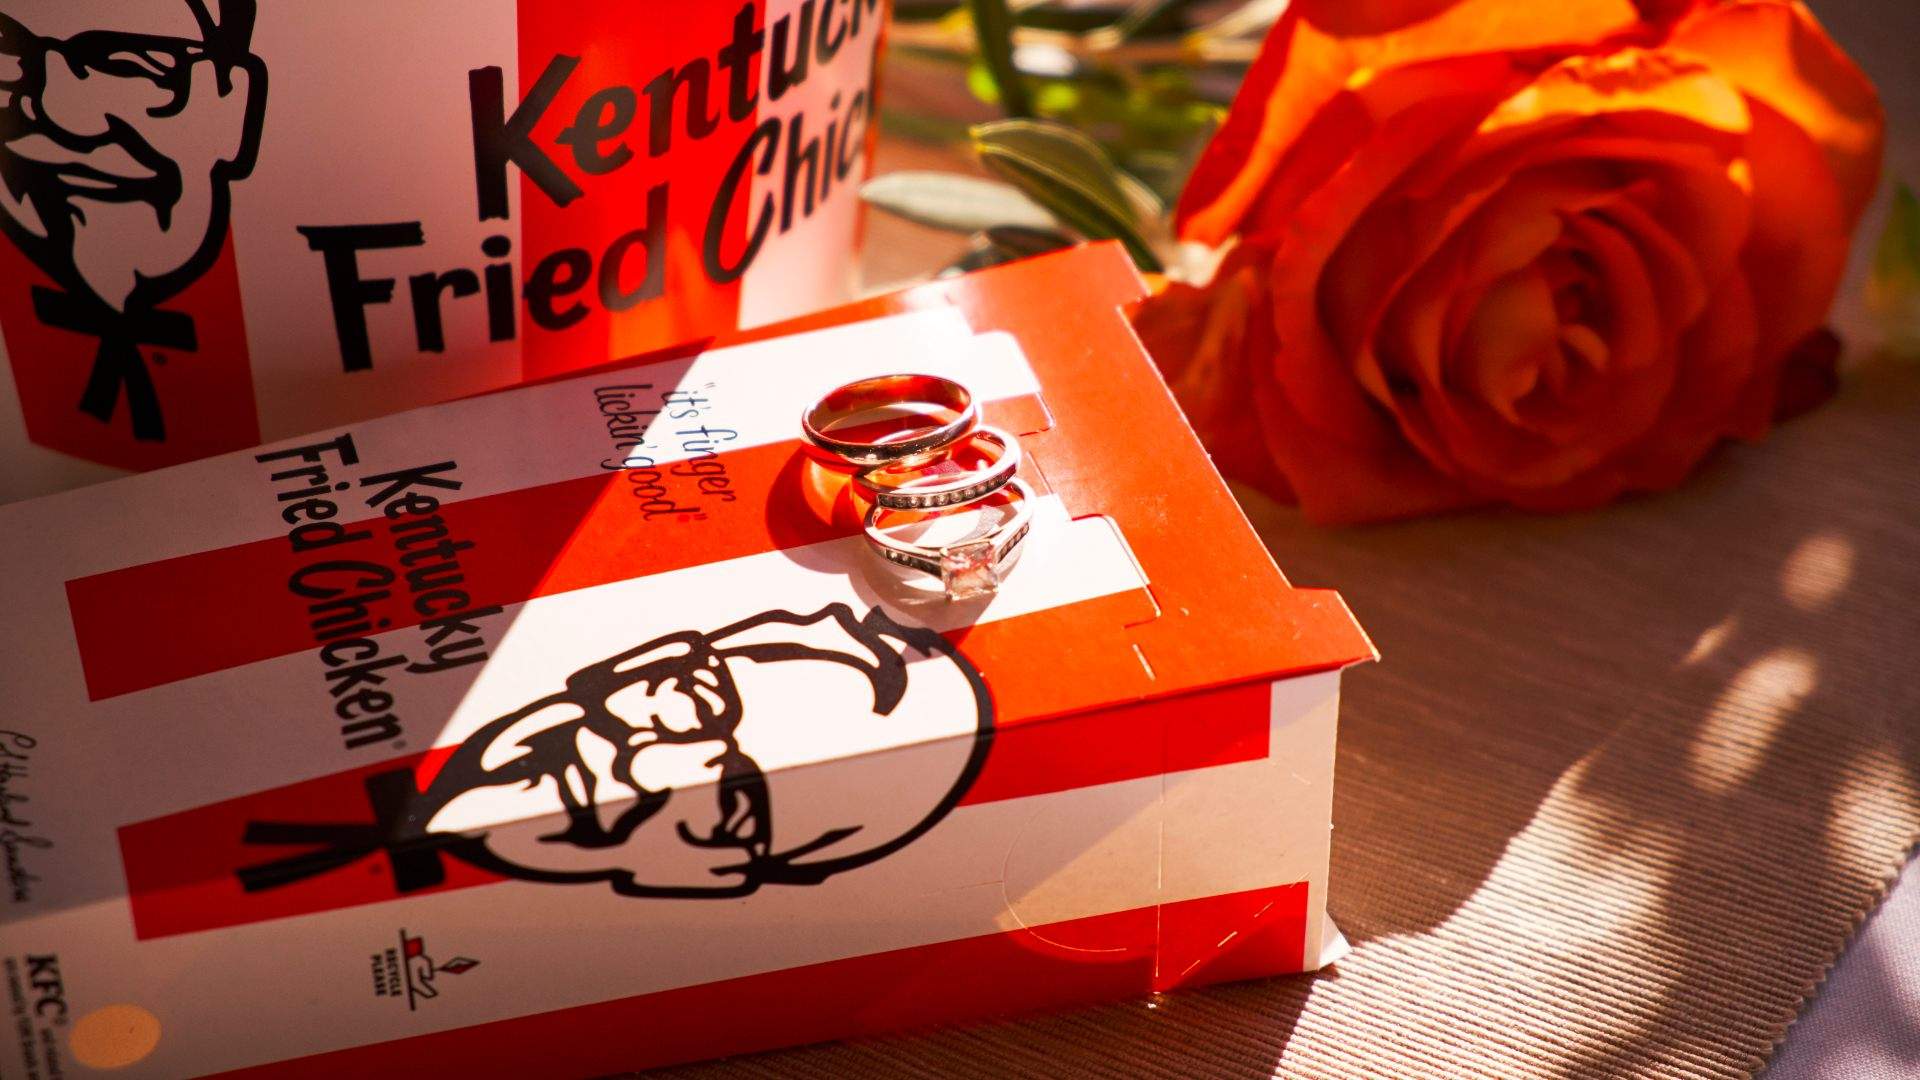 KFC Has Launched a Wedding Service If Your Relationship Is Based on Undying Love for Fried Chicken